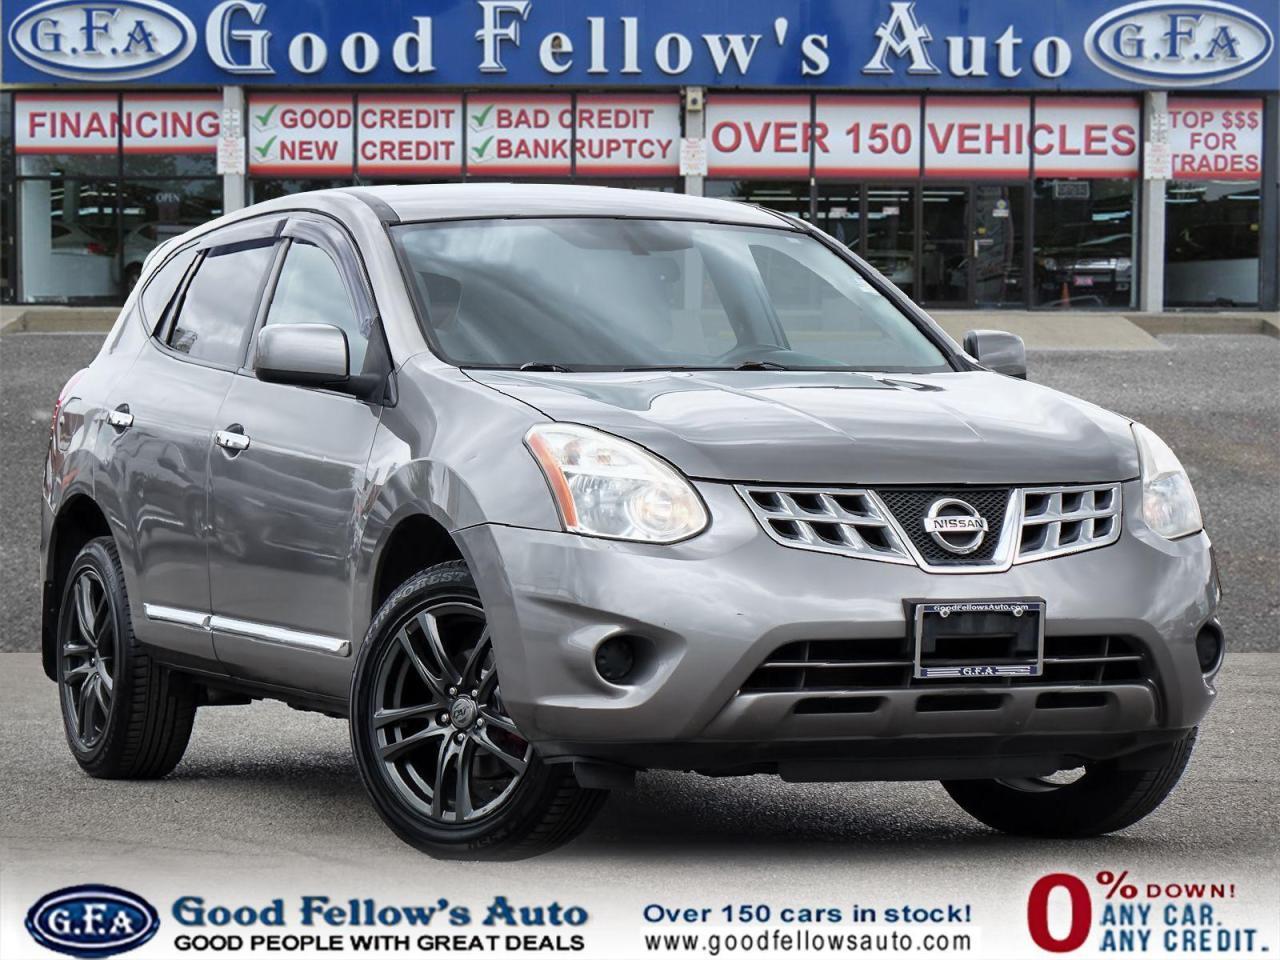 2012 Nissan Rogue AS IS